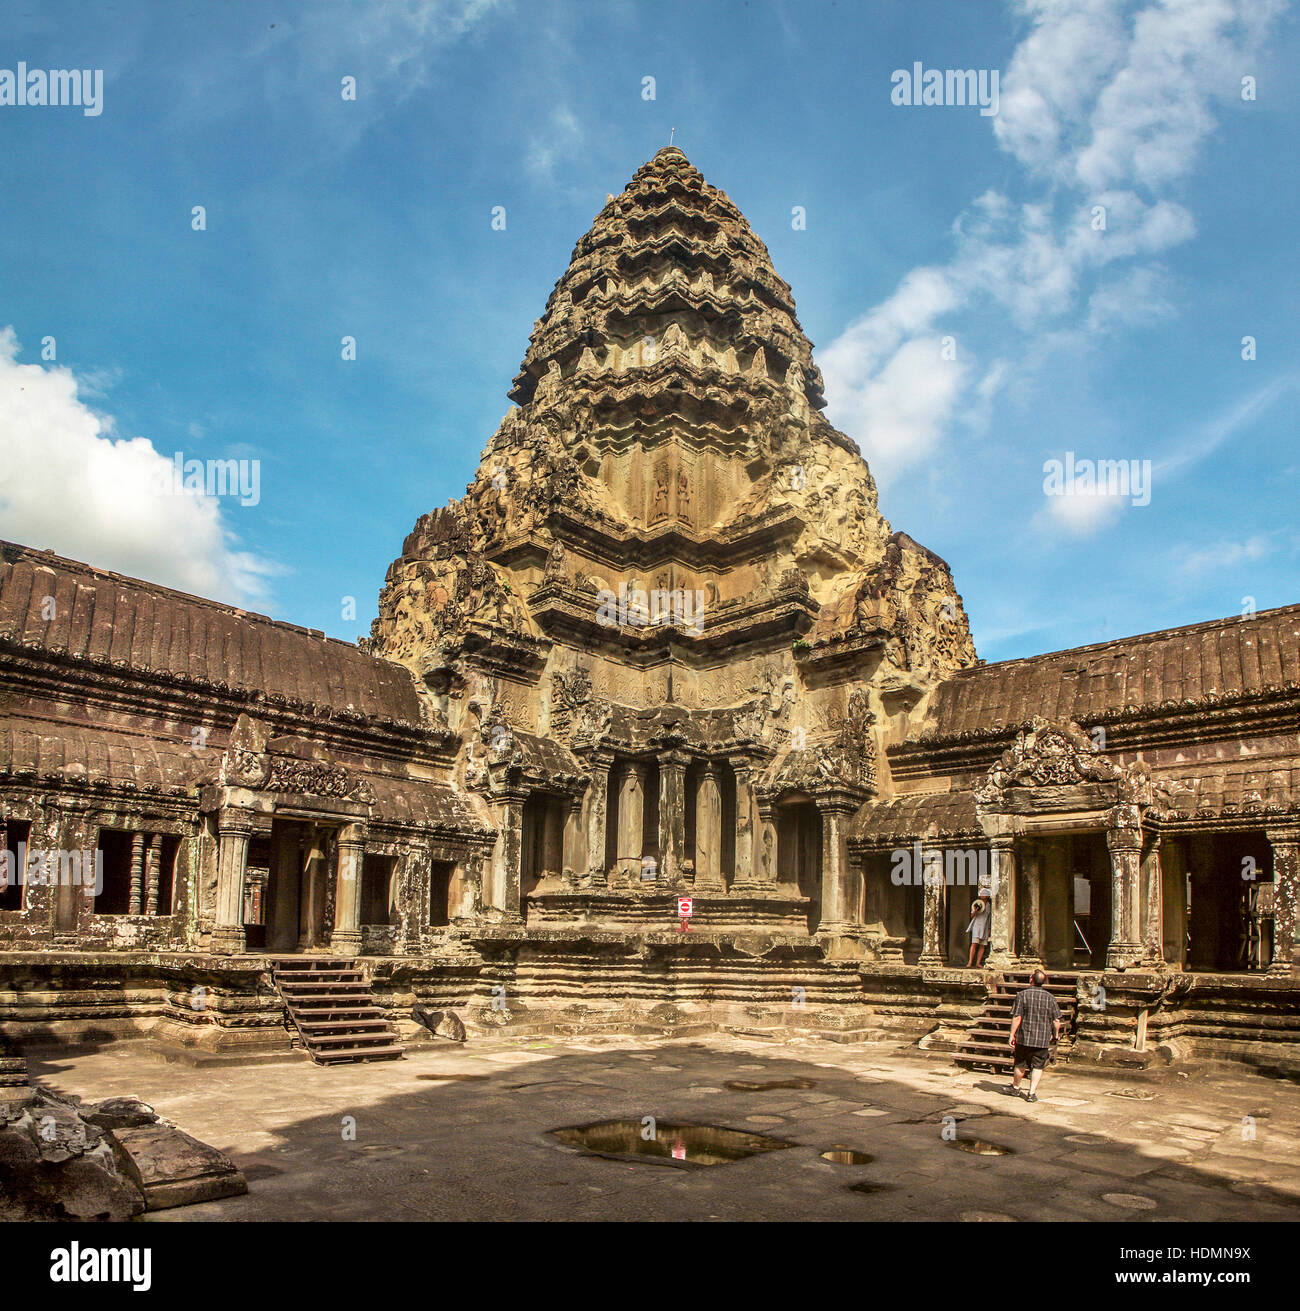 One of the inner courtyards at Angkor Wat, Siem Reap, Kingdom of Cambodia. Stock Photo